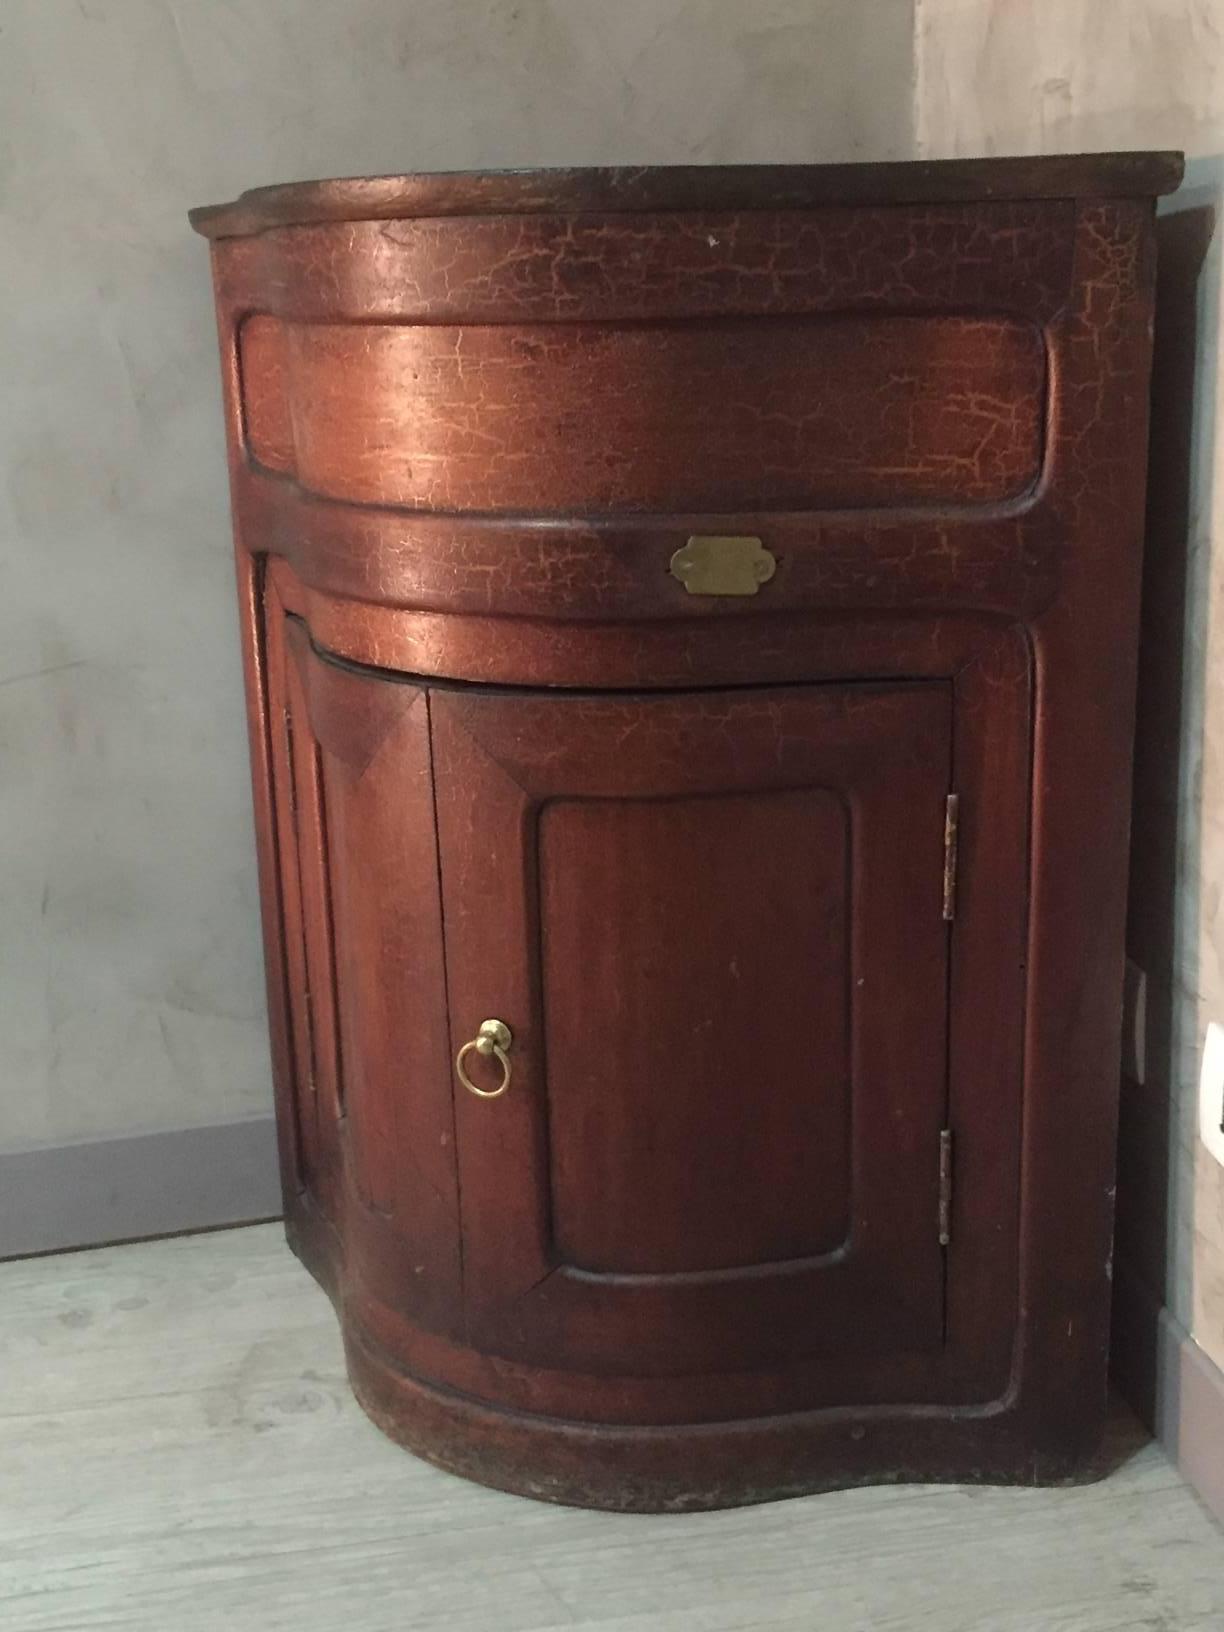 French corner cabinet. It was used in a bathroom. There is a shelf with a hole for the pipes. But the shelf is to restored.